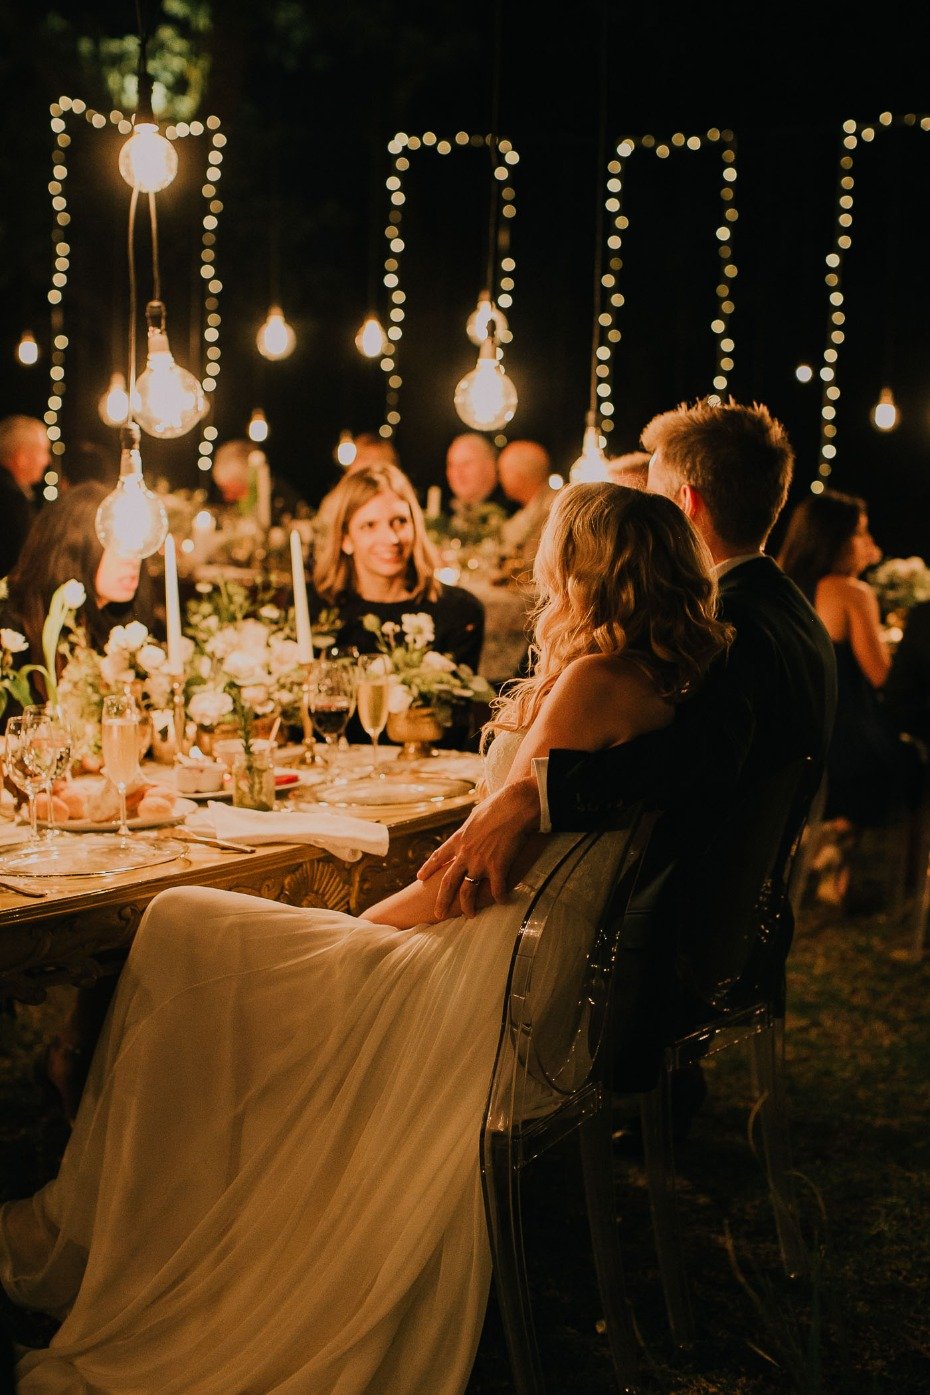 Lighting ideas for a nighttime reception